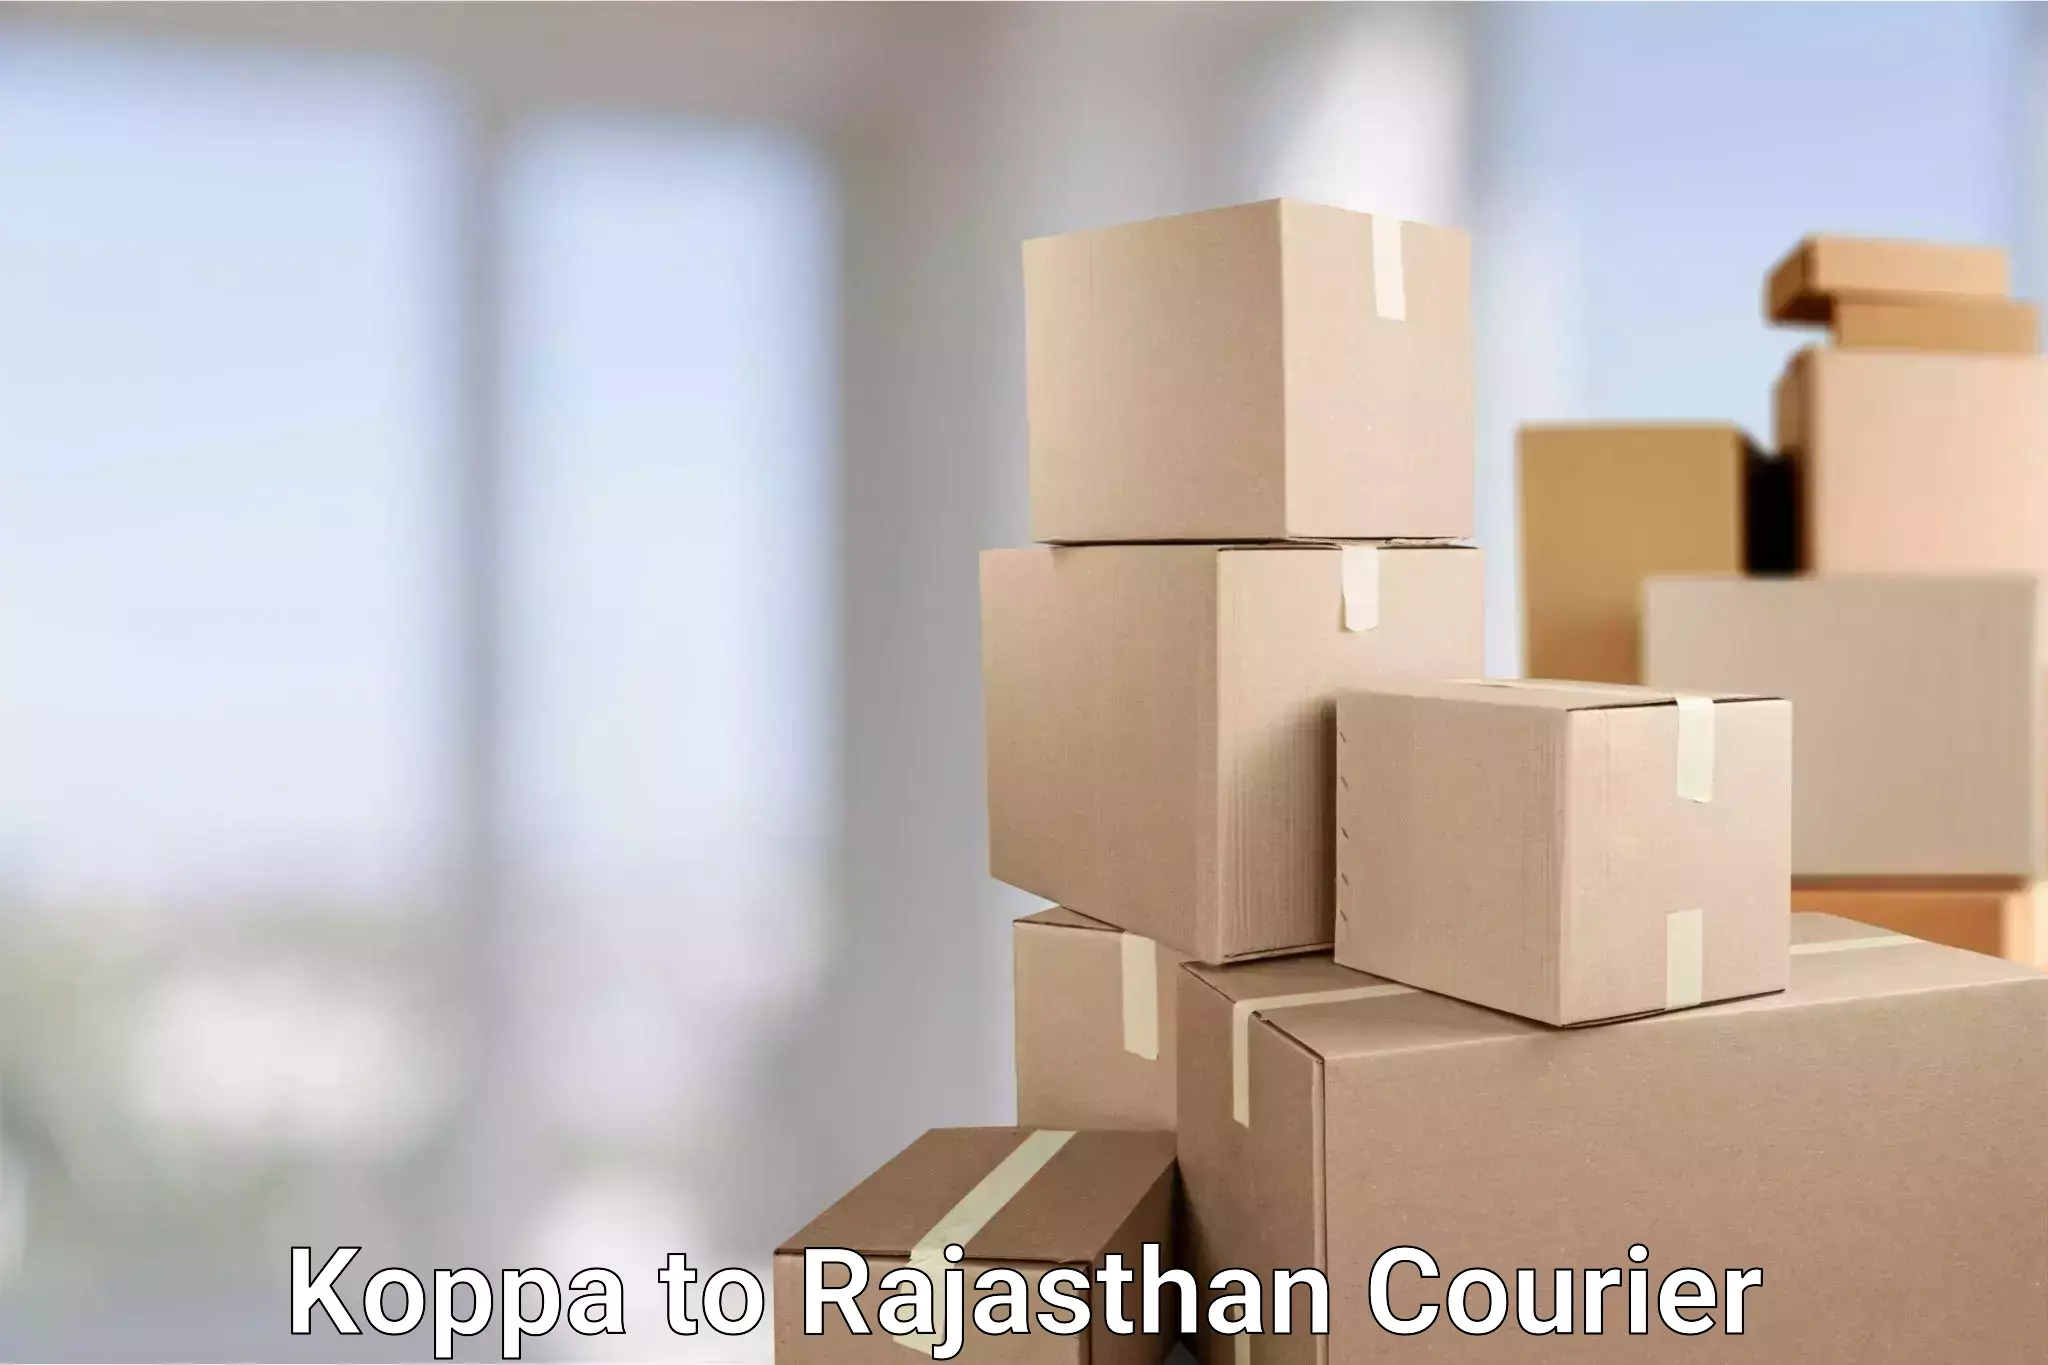 On-call courier service in Koppa to Sri Ganganagar